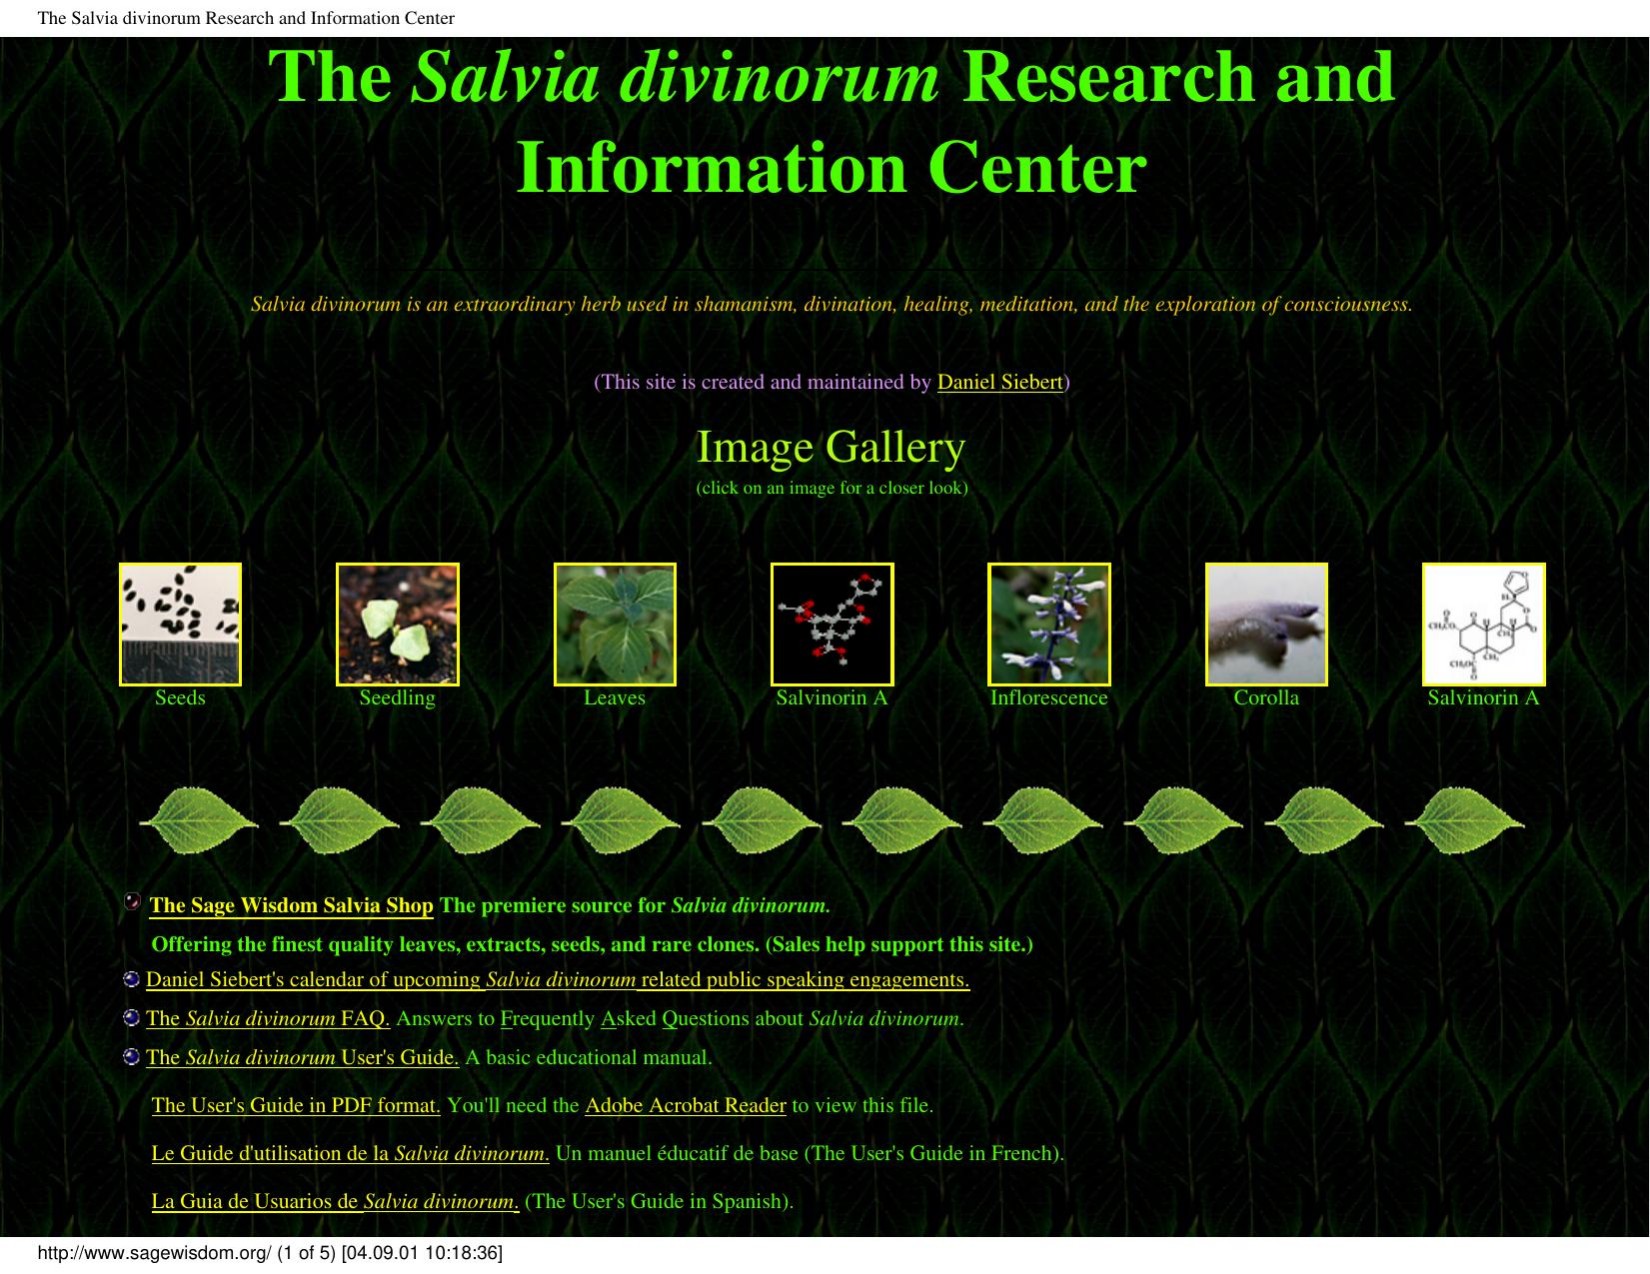 The Salvia divinorum Research and Information Center